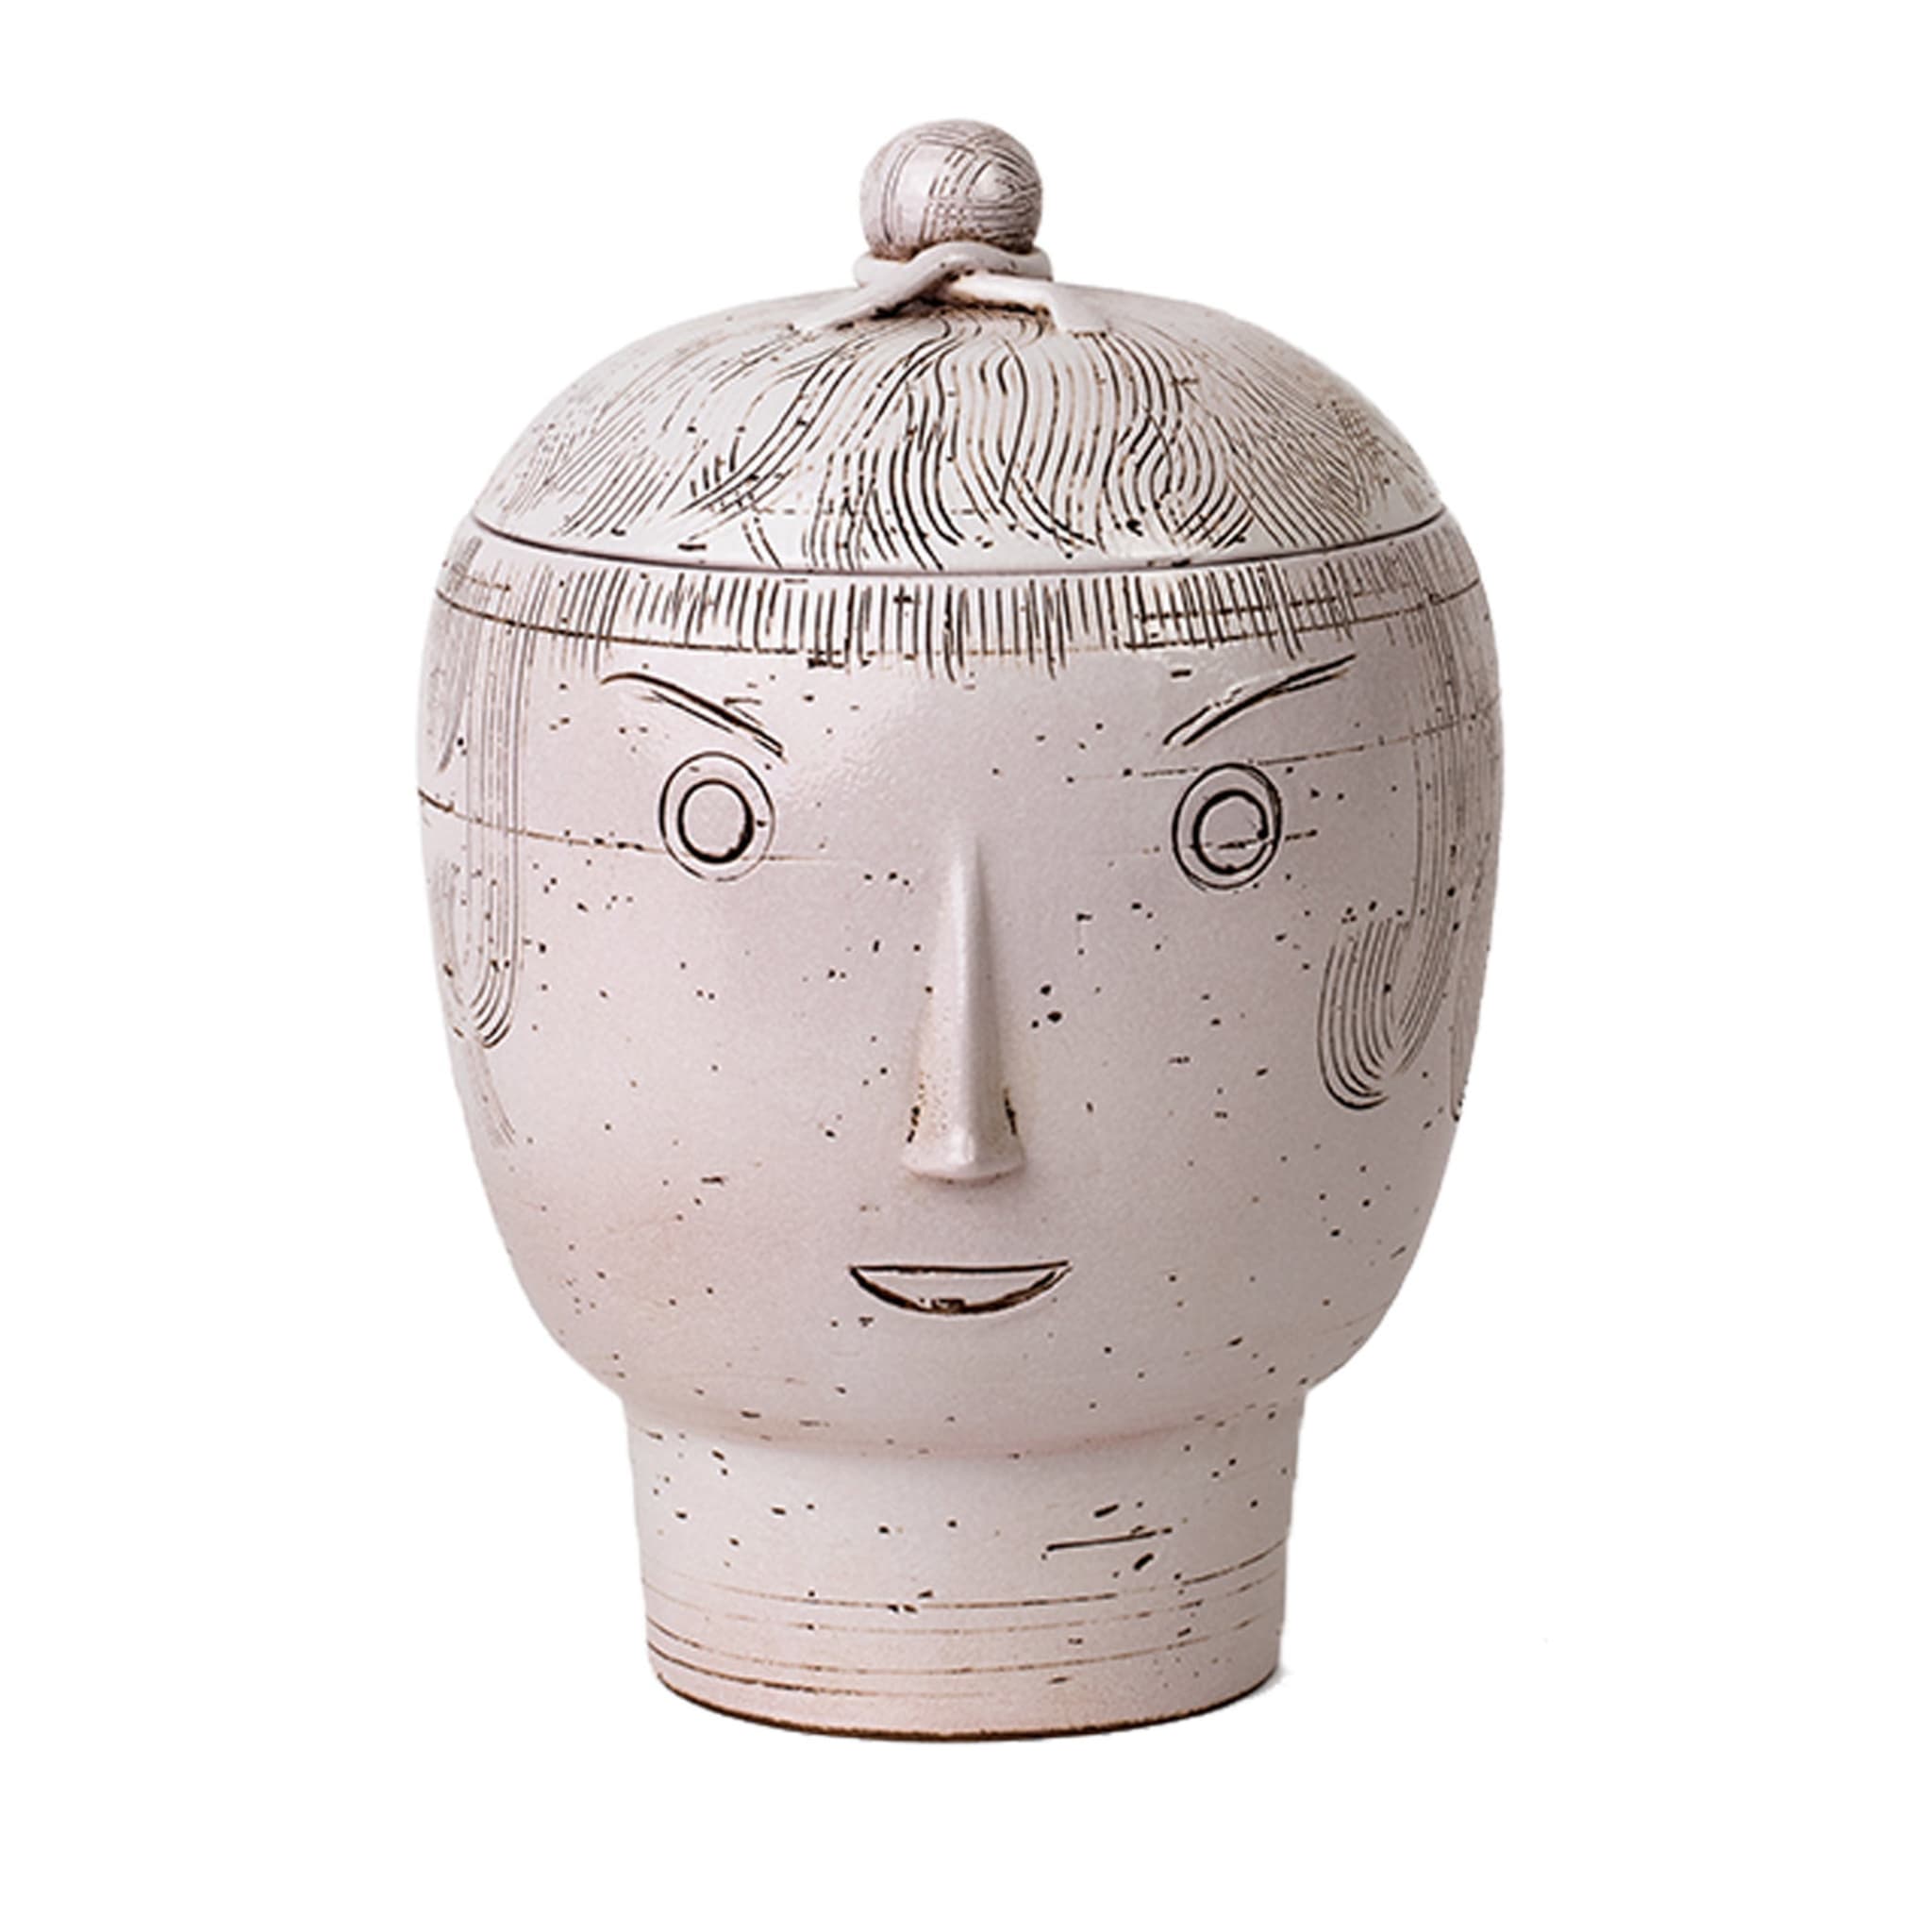 Anthropomorphic Off-White Vase with Lid by Aldo Londi - Main view